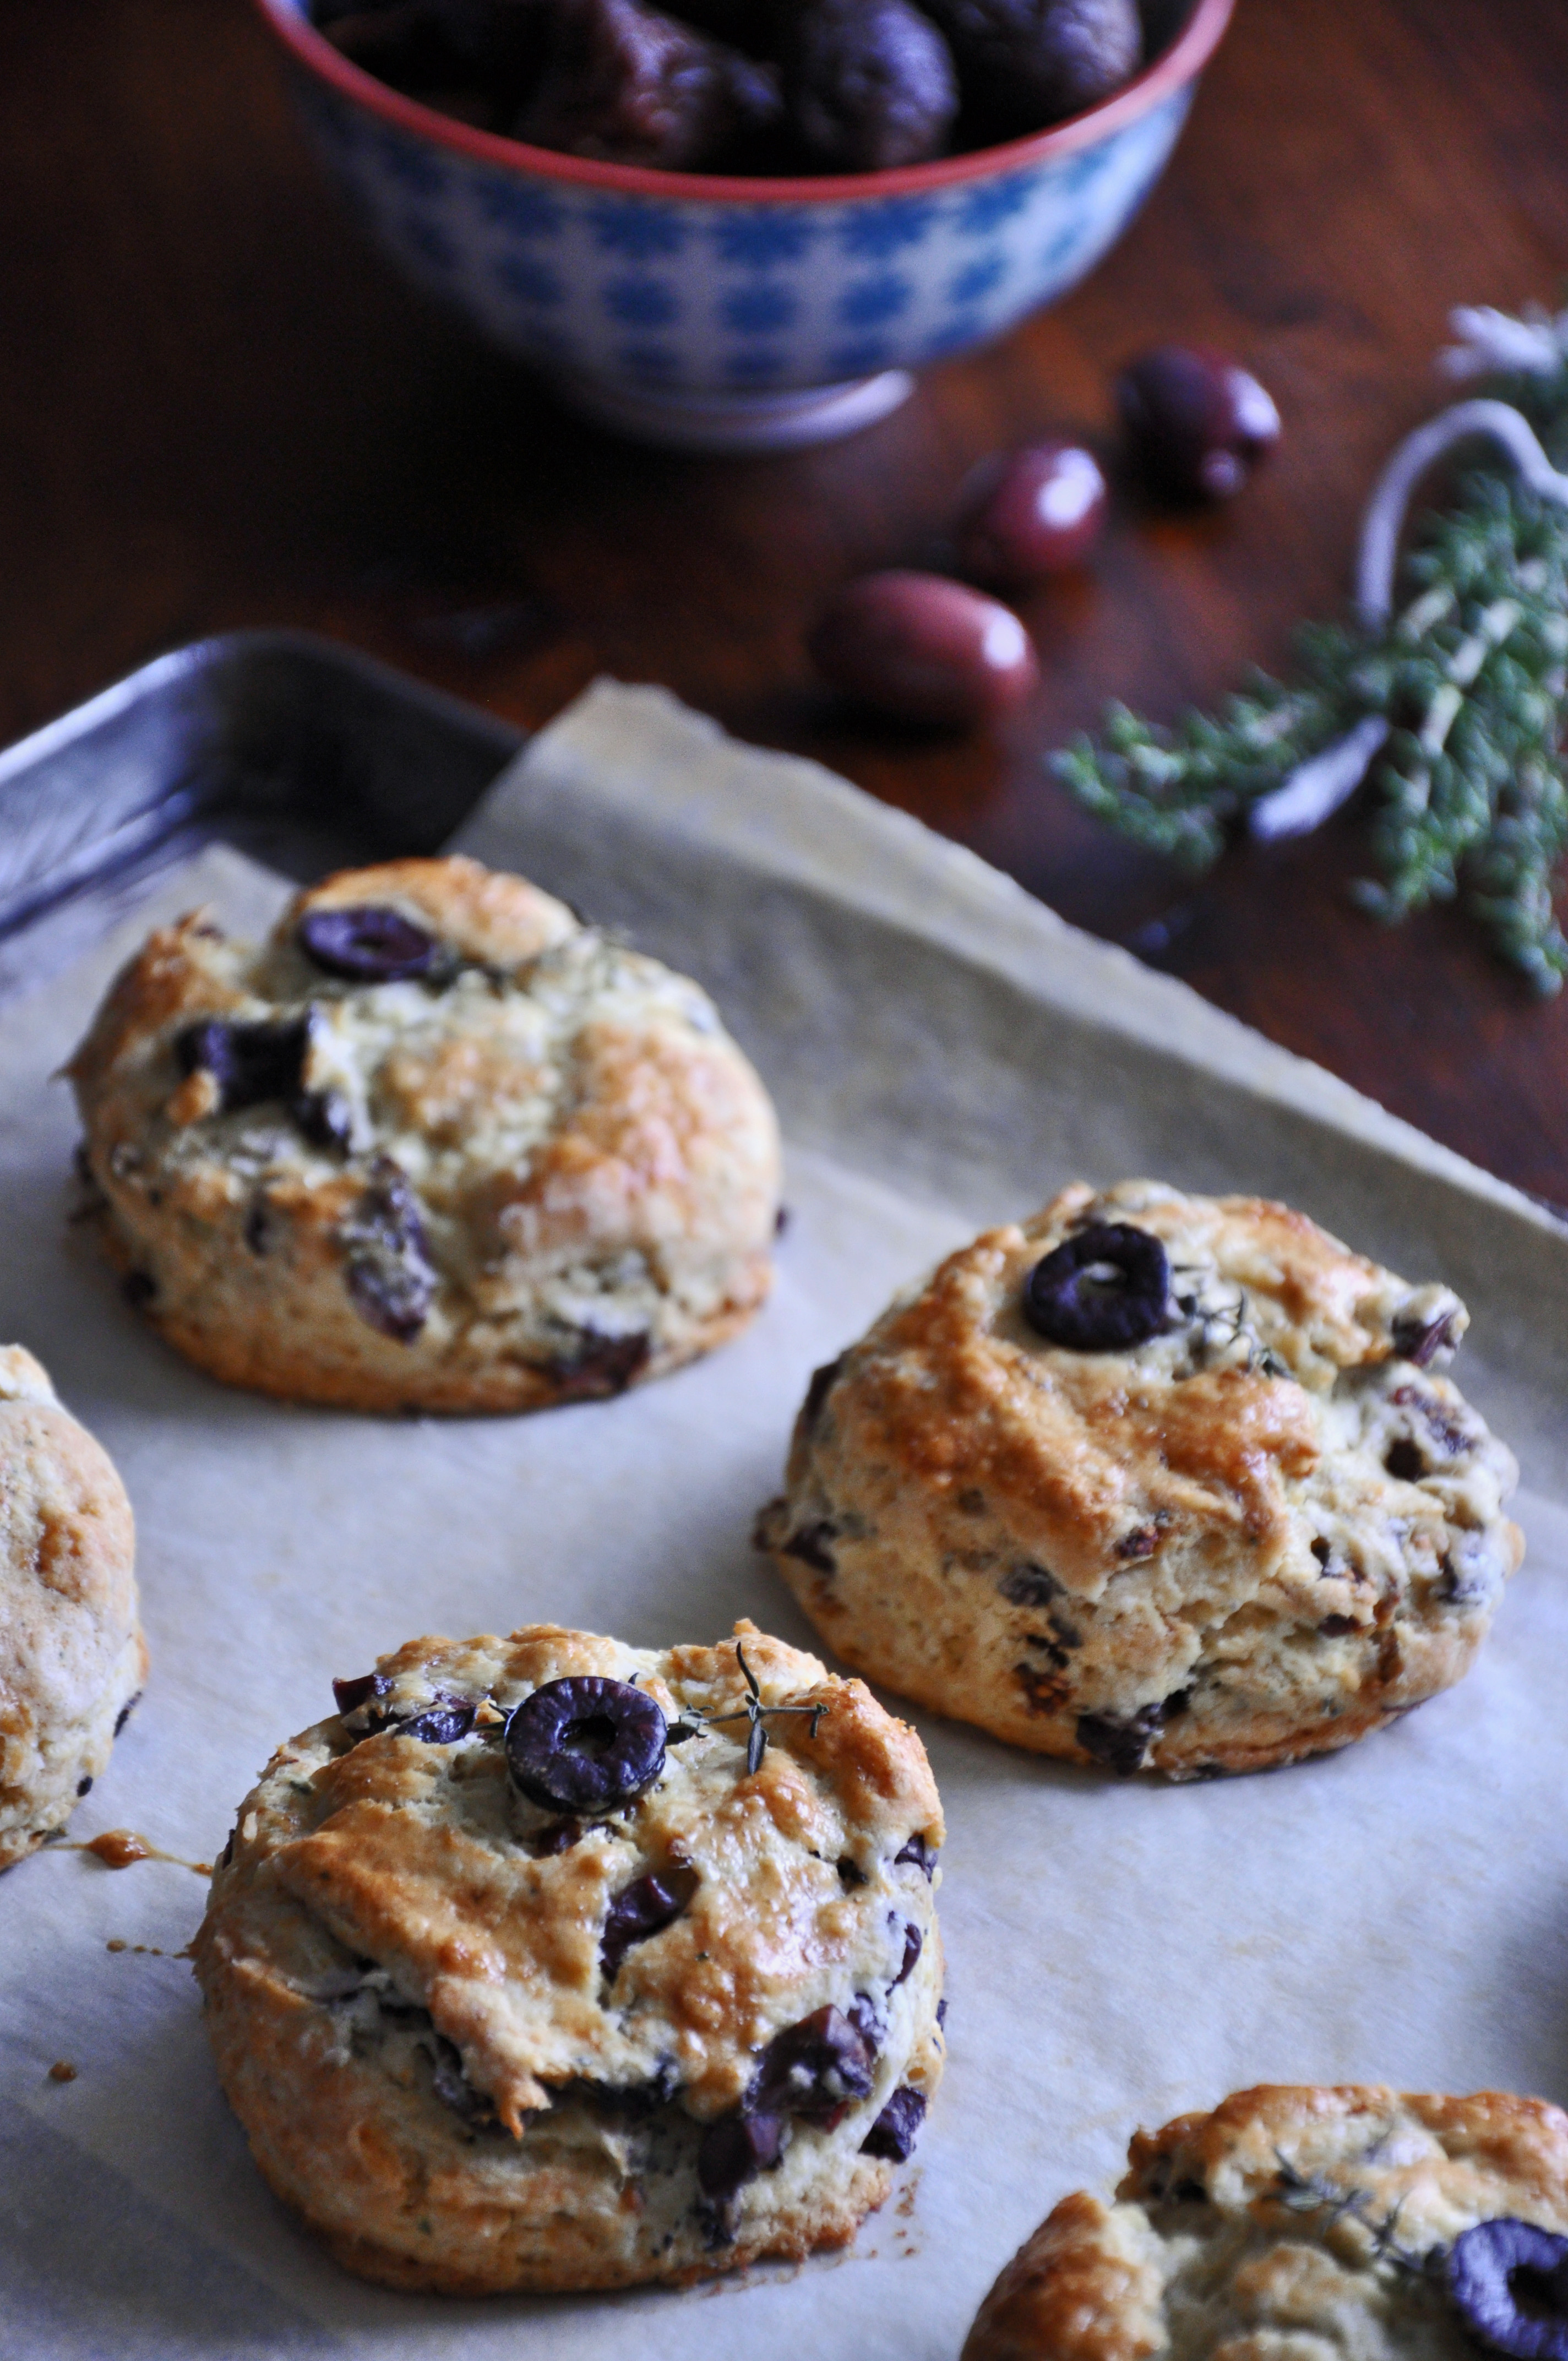 http://www.siftingfocus.com/wp-content/uploads/2012/11/Fig-Olive-and-Thyme-Scones110212001PSE.jpg